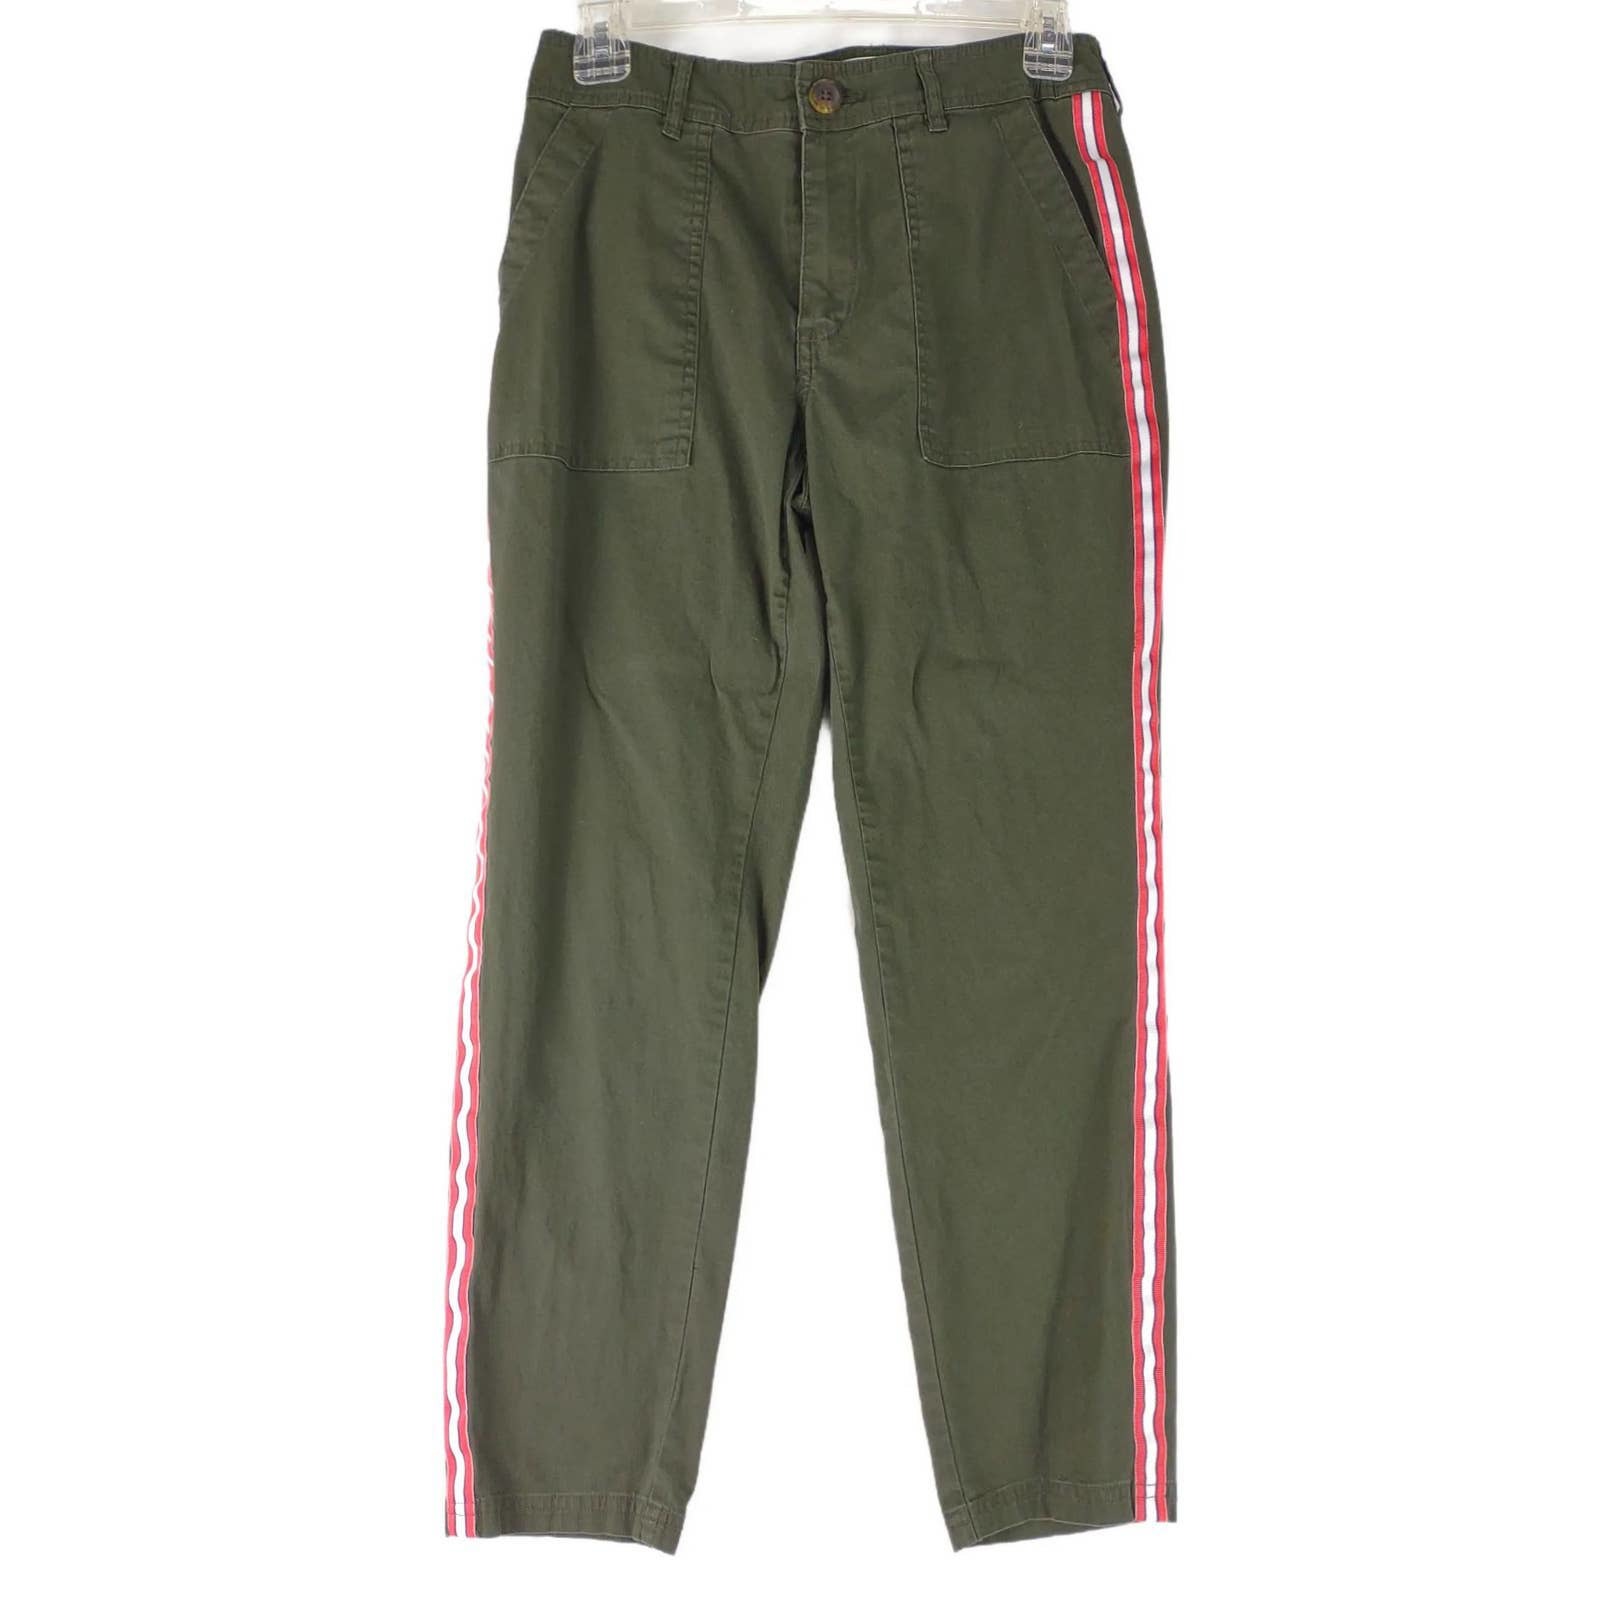 Primary image for POPSUGAR Women's Size 6 Army/Olive Green Red White Striped Retro Chino Pants